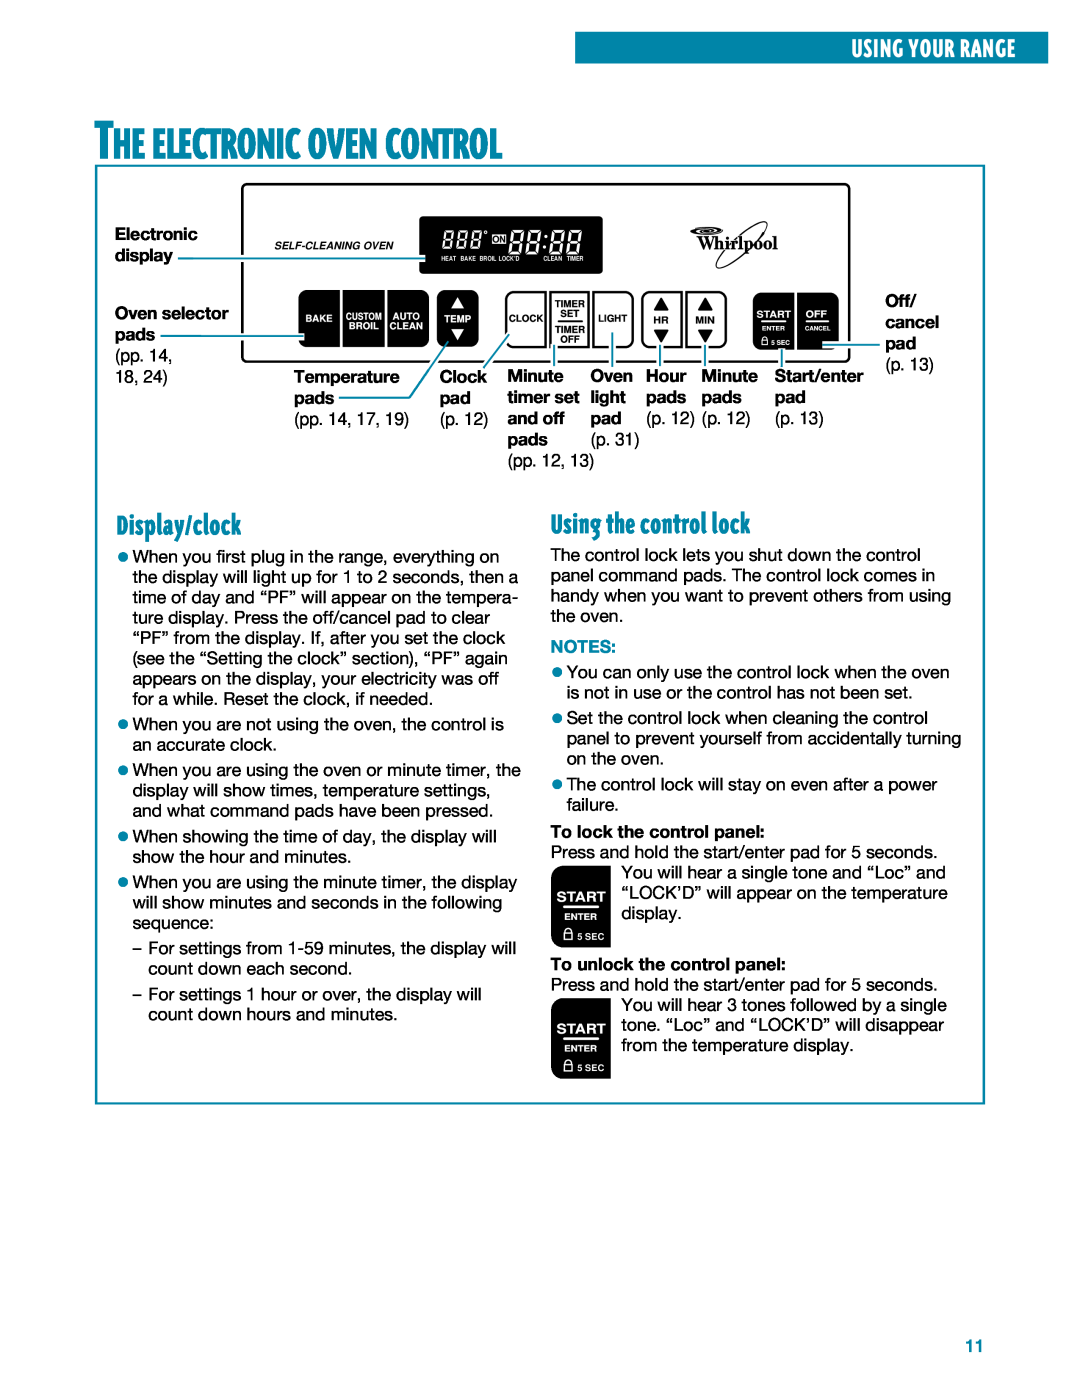 Whirlpool SF385PEE warranty The Electronic Oven Control, Display/clock, Using the control lock, Using Your Range, p. 12 p 